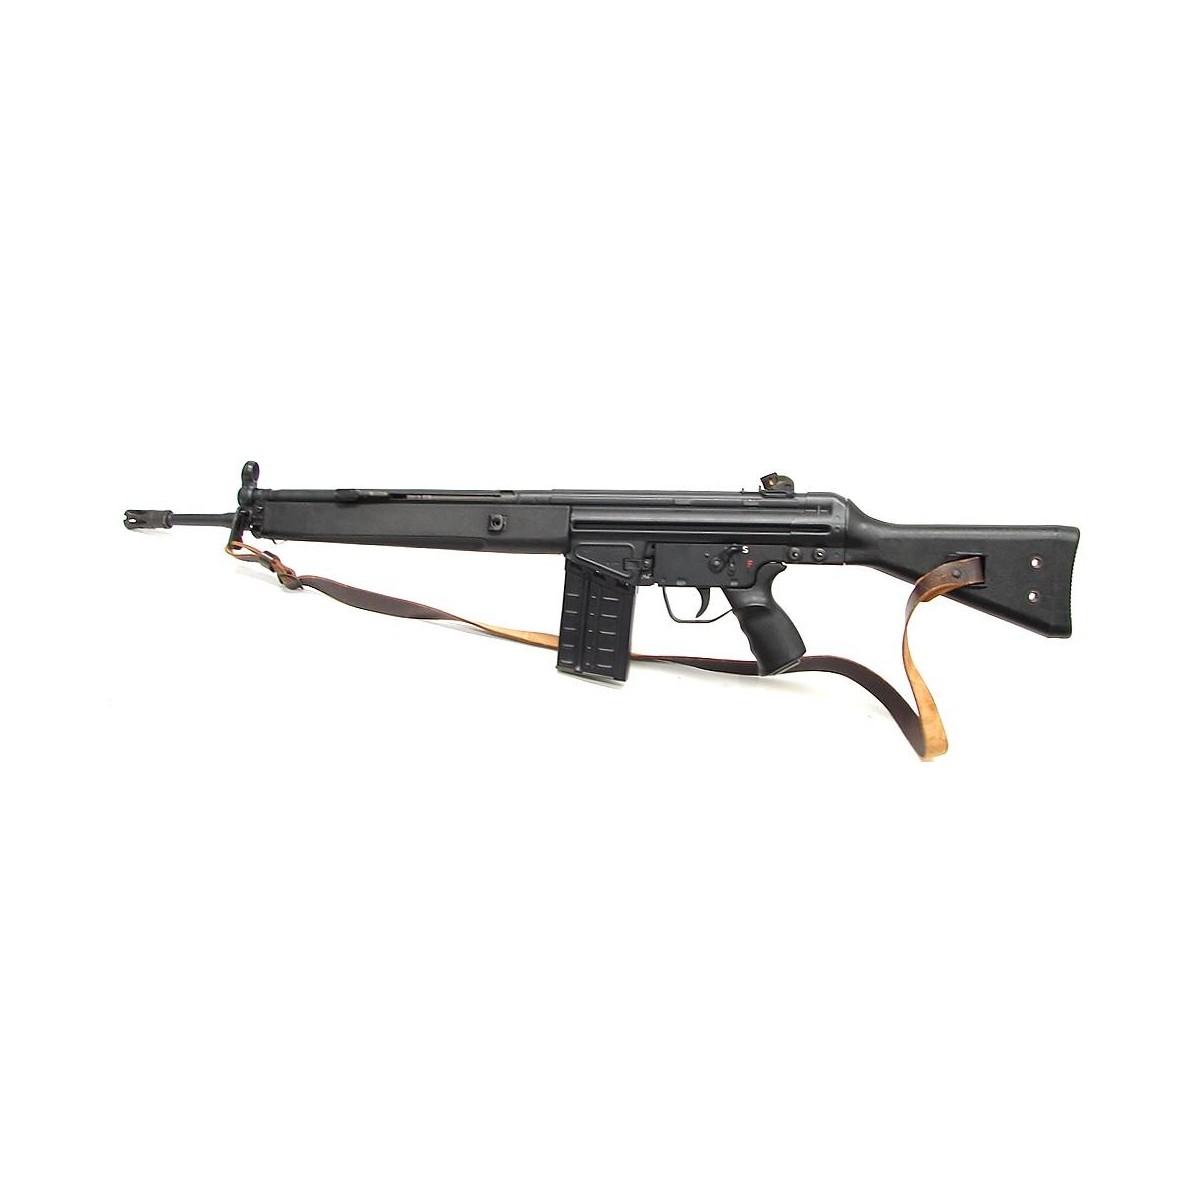 Heckler & Koch 91 .308 Win caliber rifle with 18 barrel, fixed stock ...